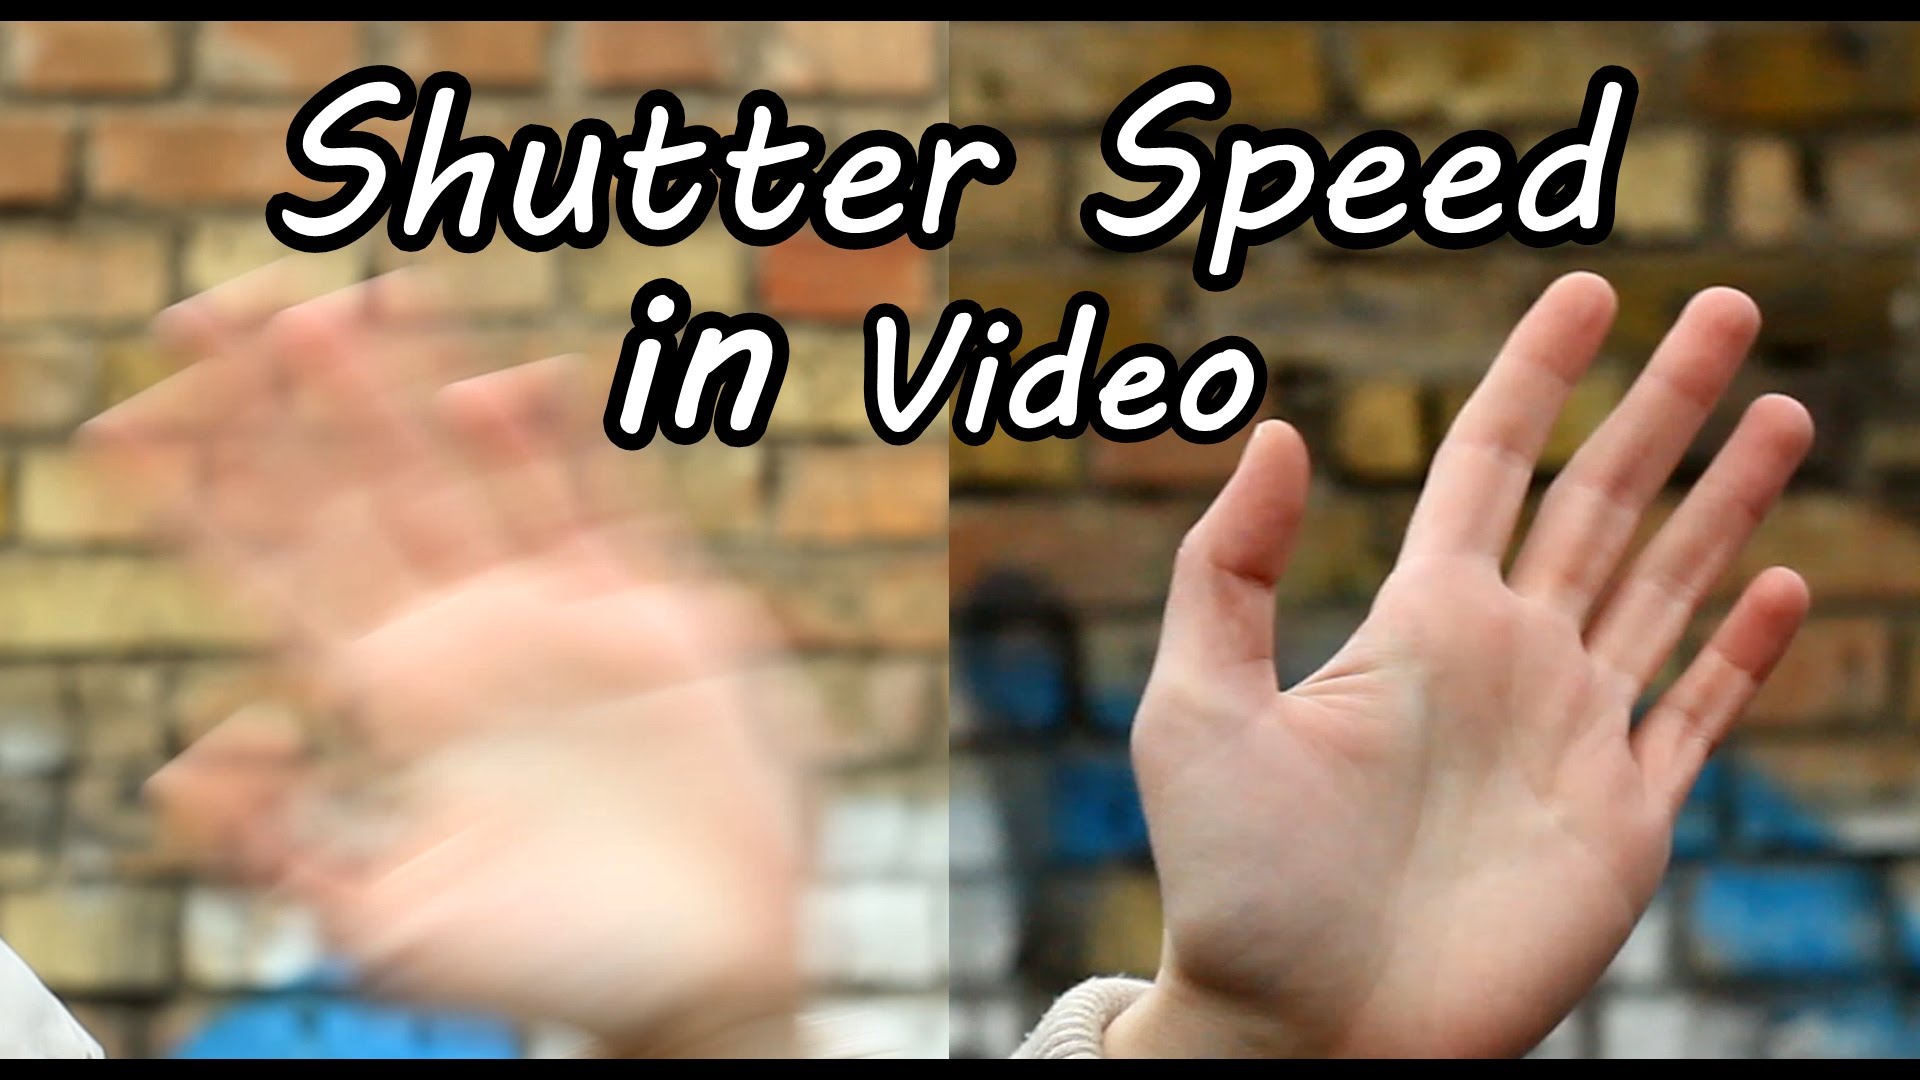 How to Use Shutter Speed in Video on DSLR Camera – Exposure Tutorial and Comparison